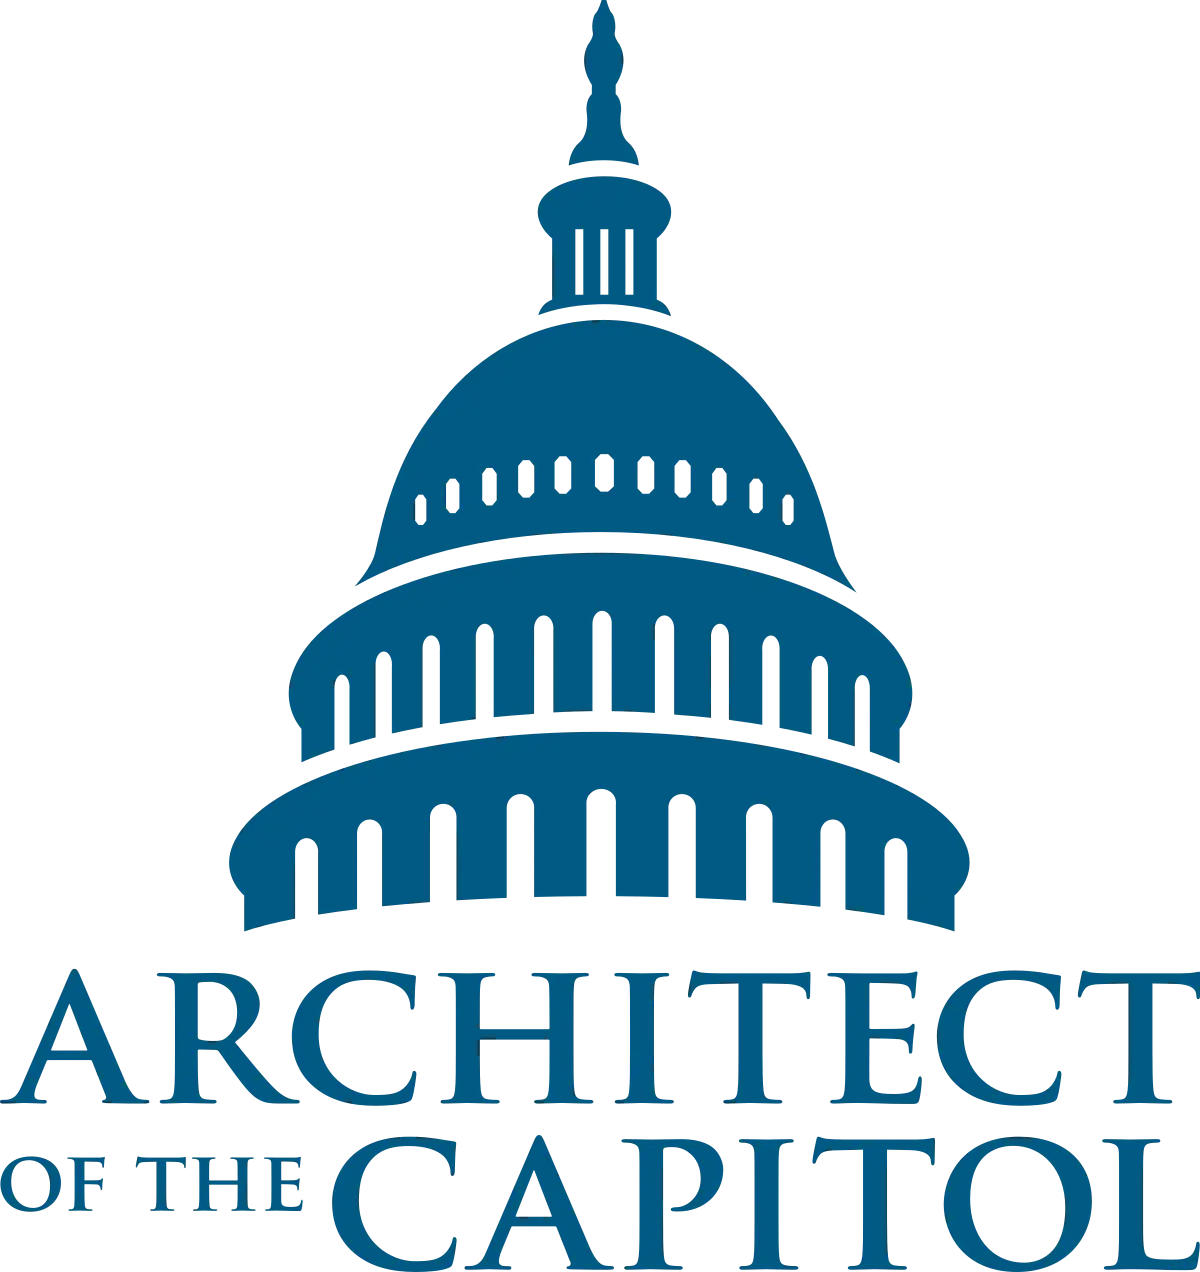 1200px-Logo_of_the_United_States_Architect_of_the_Capitol.svg